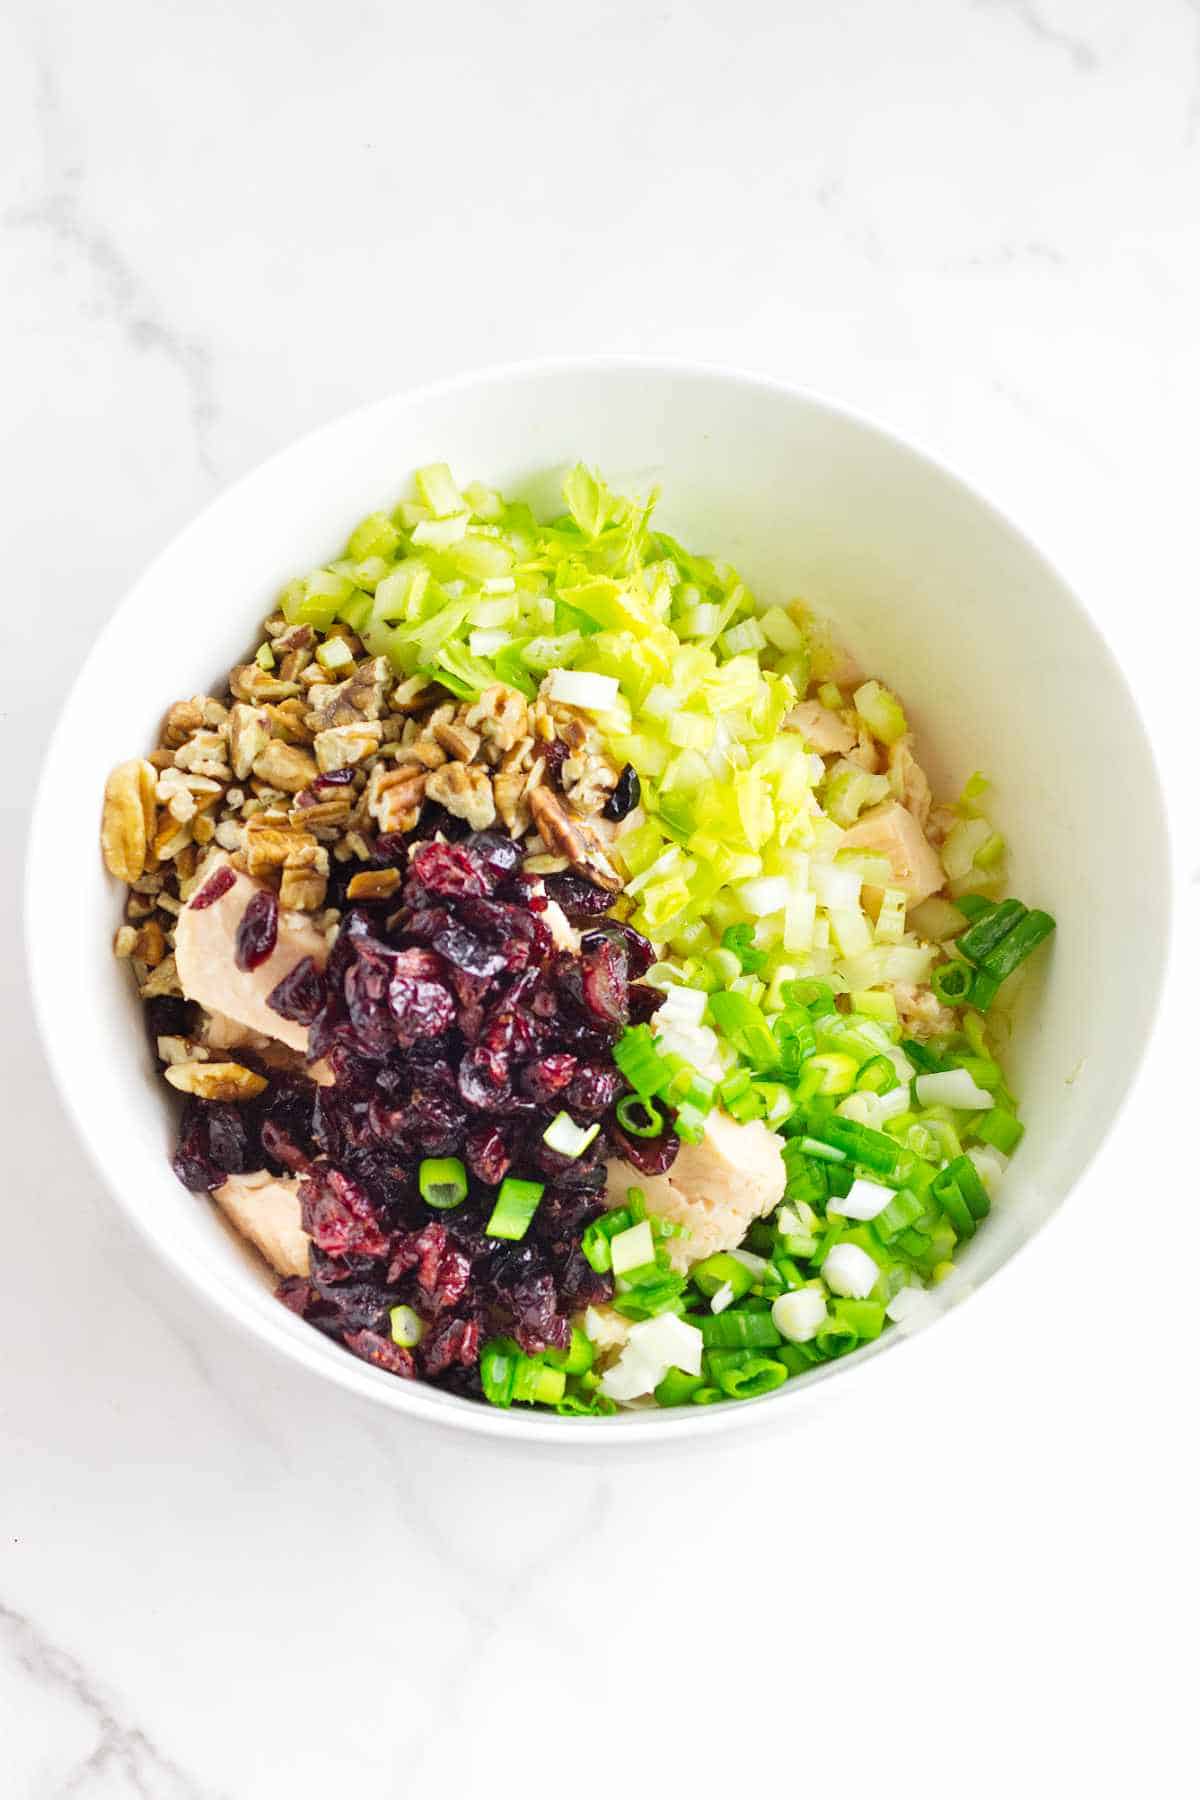 diced ingredients in a bowl: celery, chicken, green onion, dried cranberries, and chopped pecans.